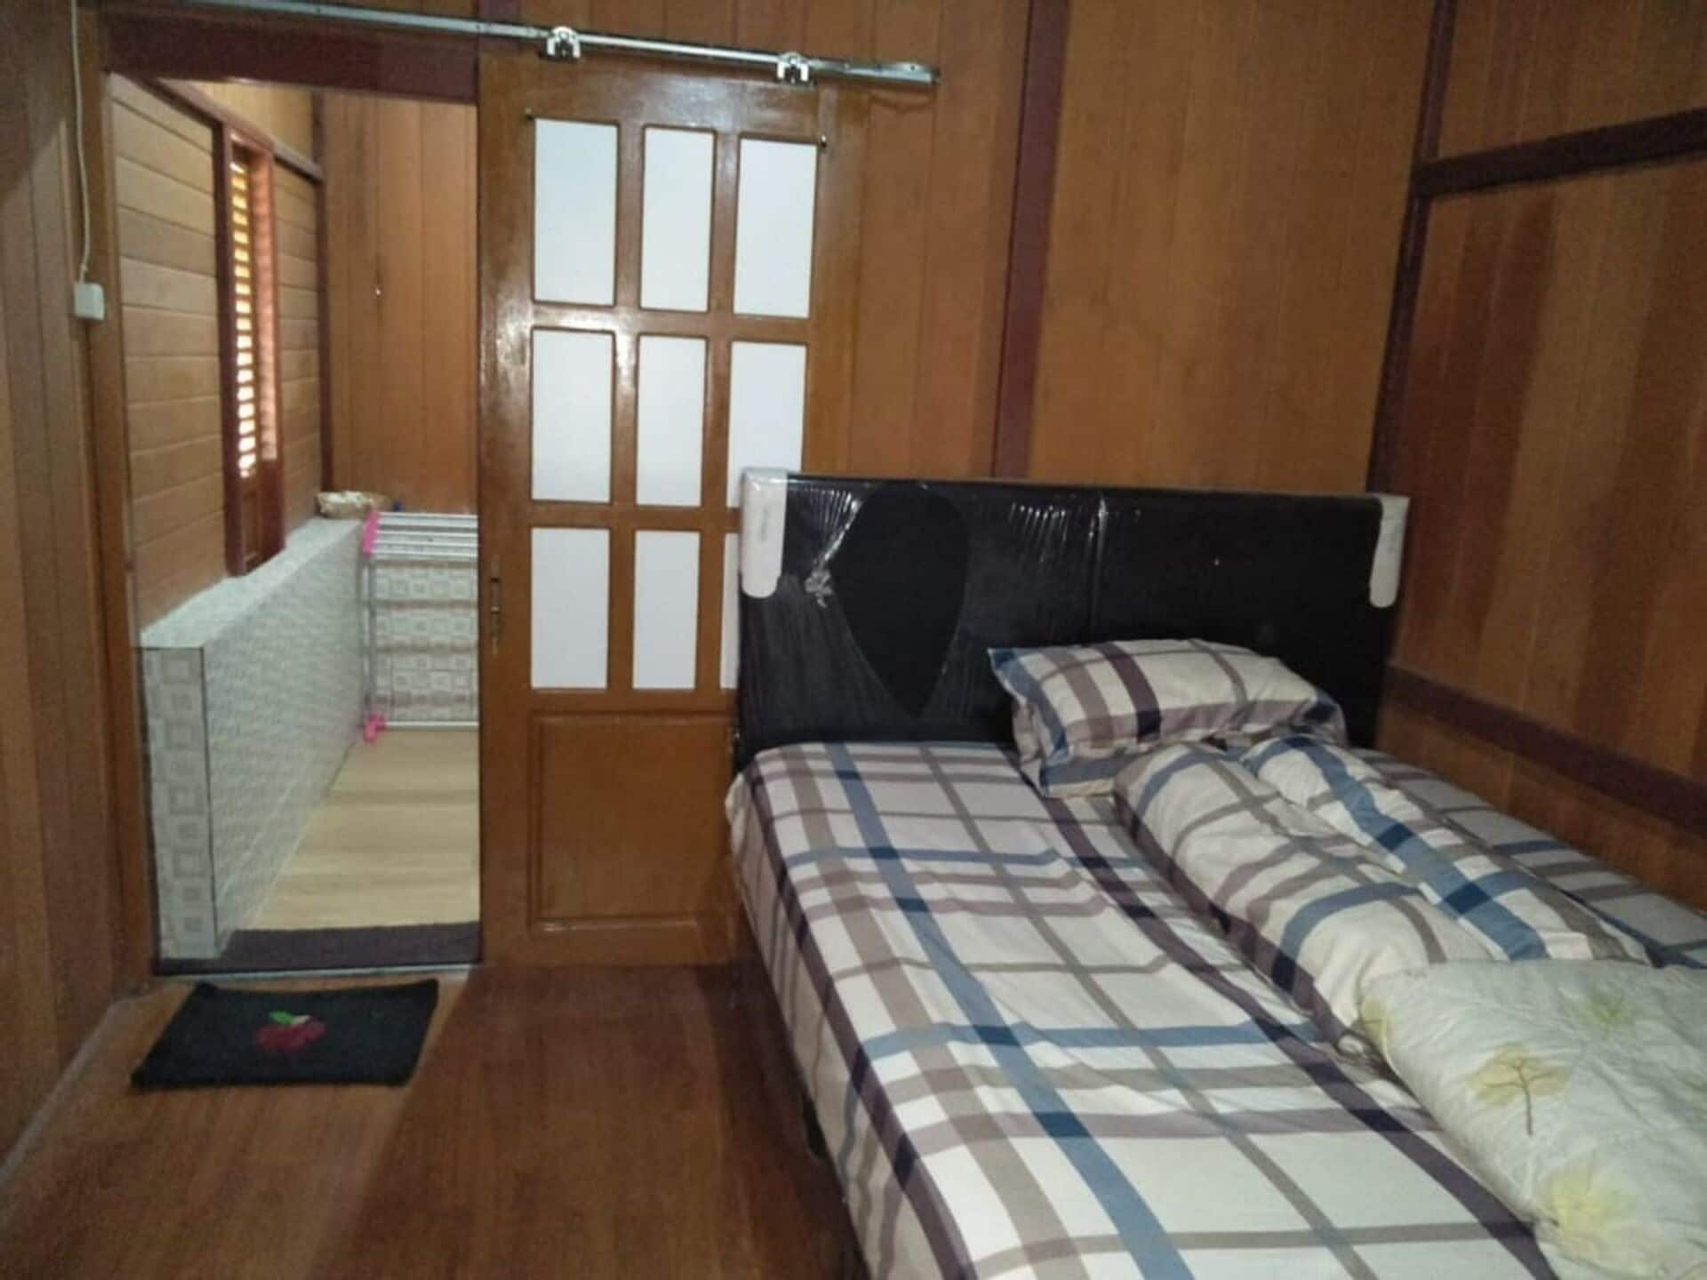 Bedroom 1, Comfortable Great and Cheap, Palu